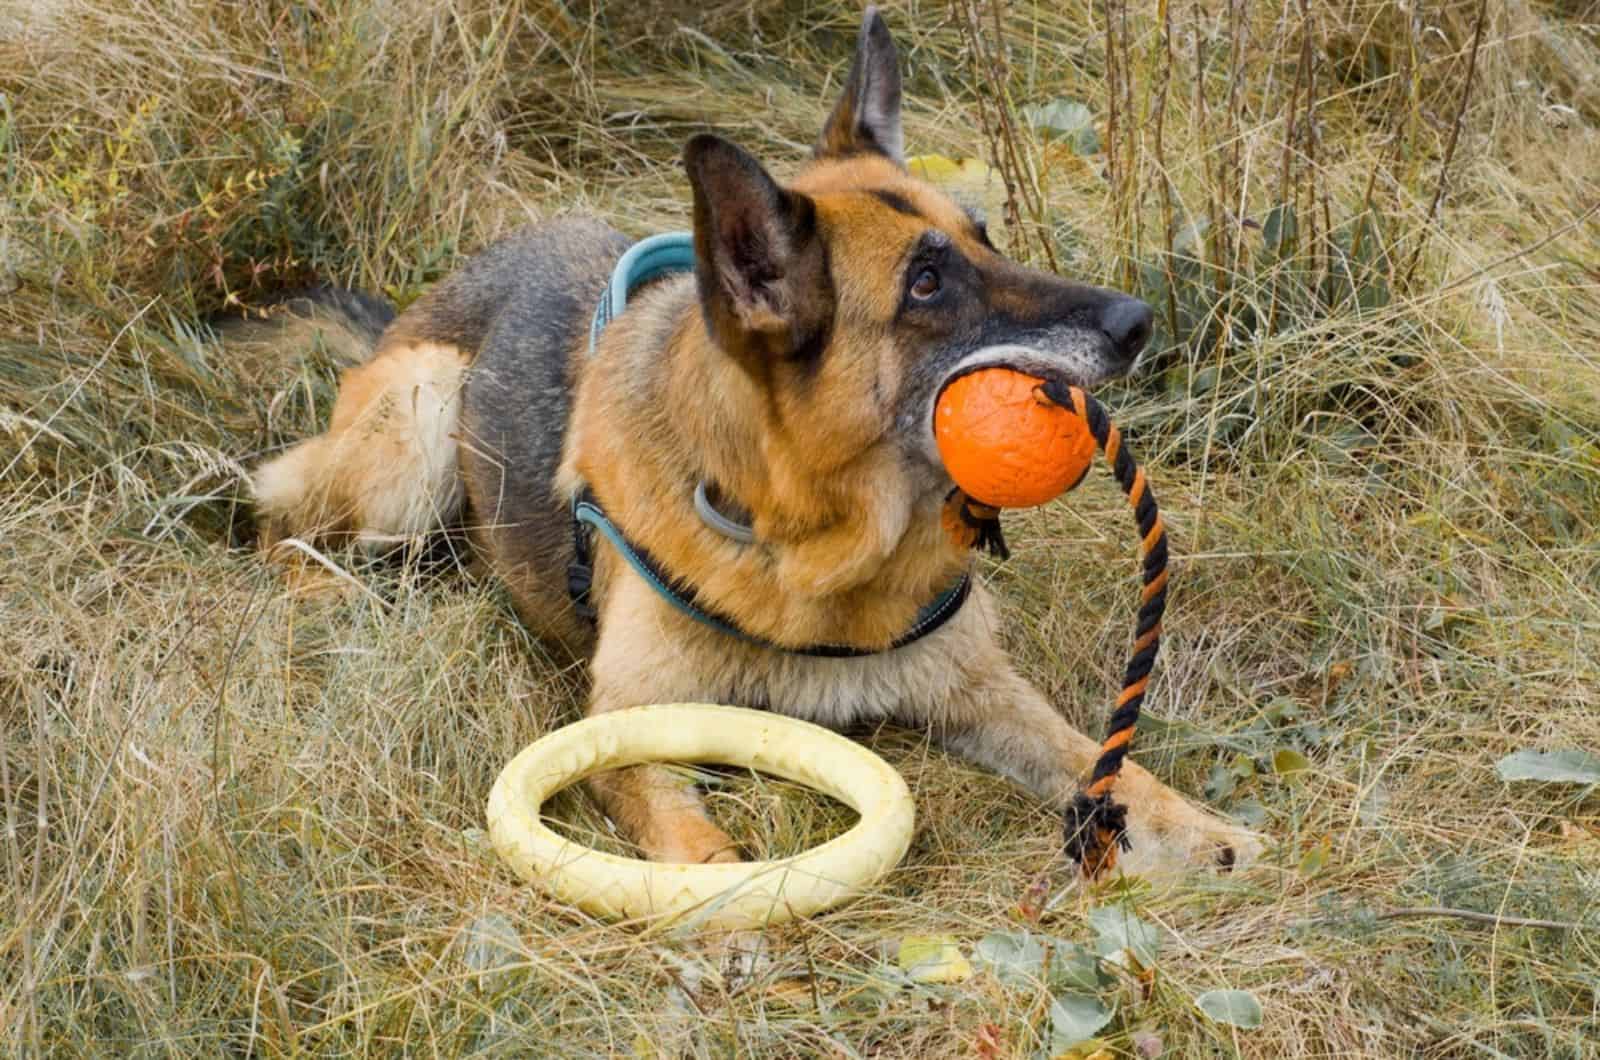 german shepherd playing with toys in grass